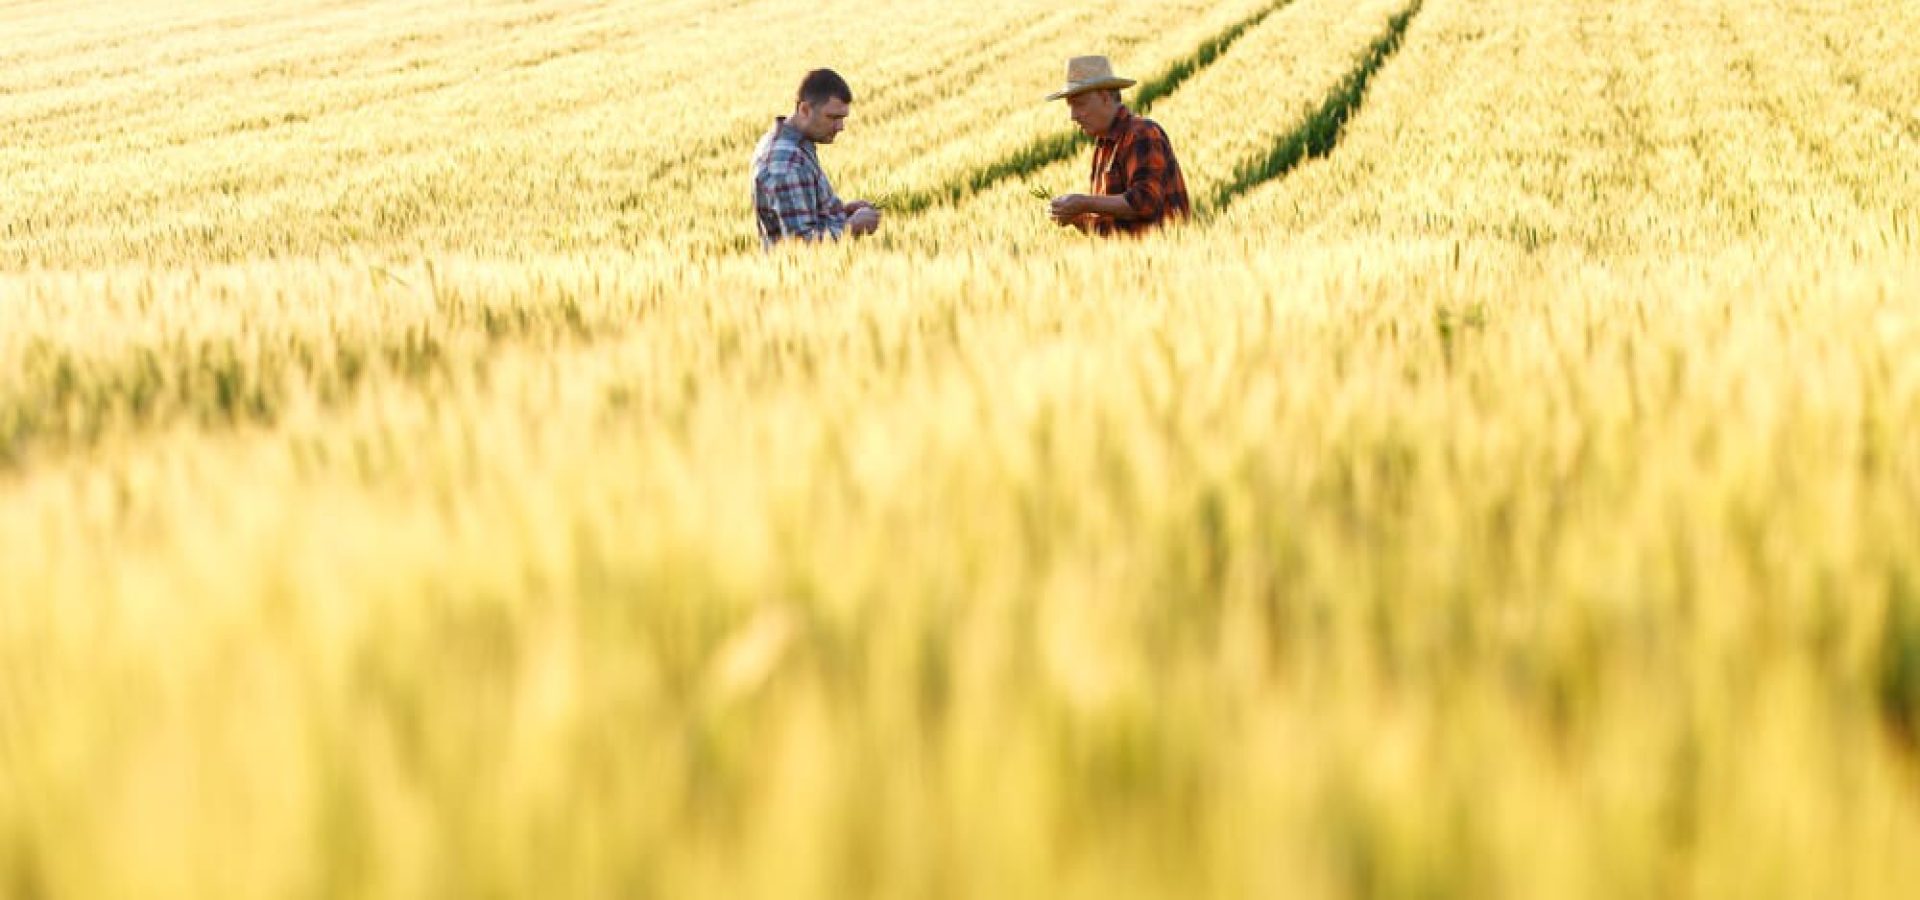 Wibest – US Government: Two farmers in the middle of a field.